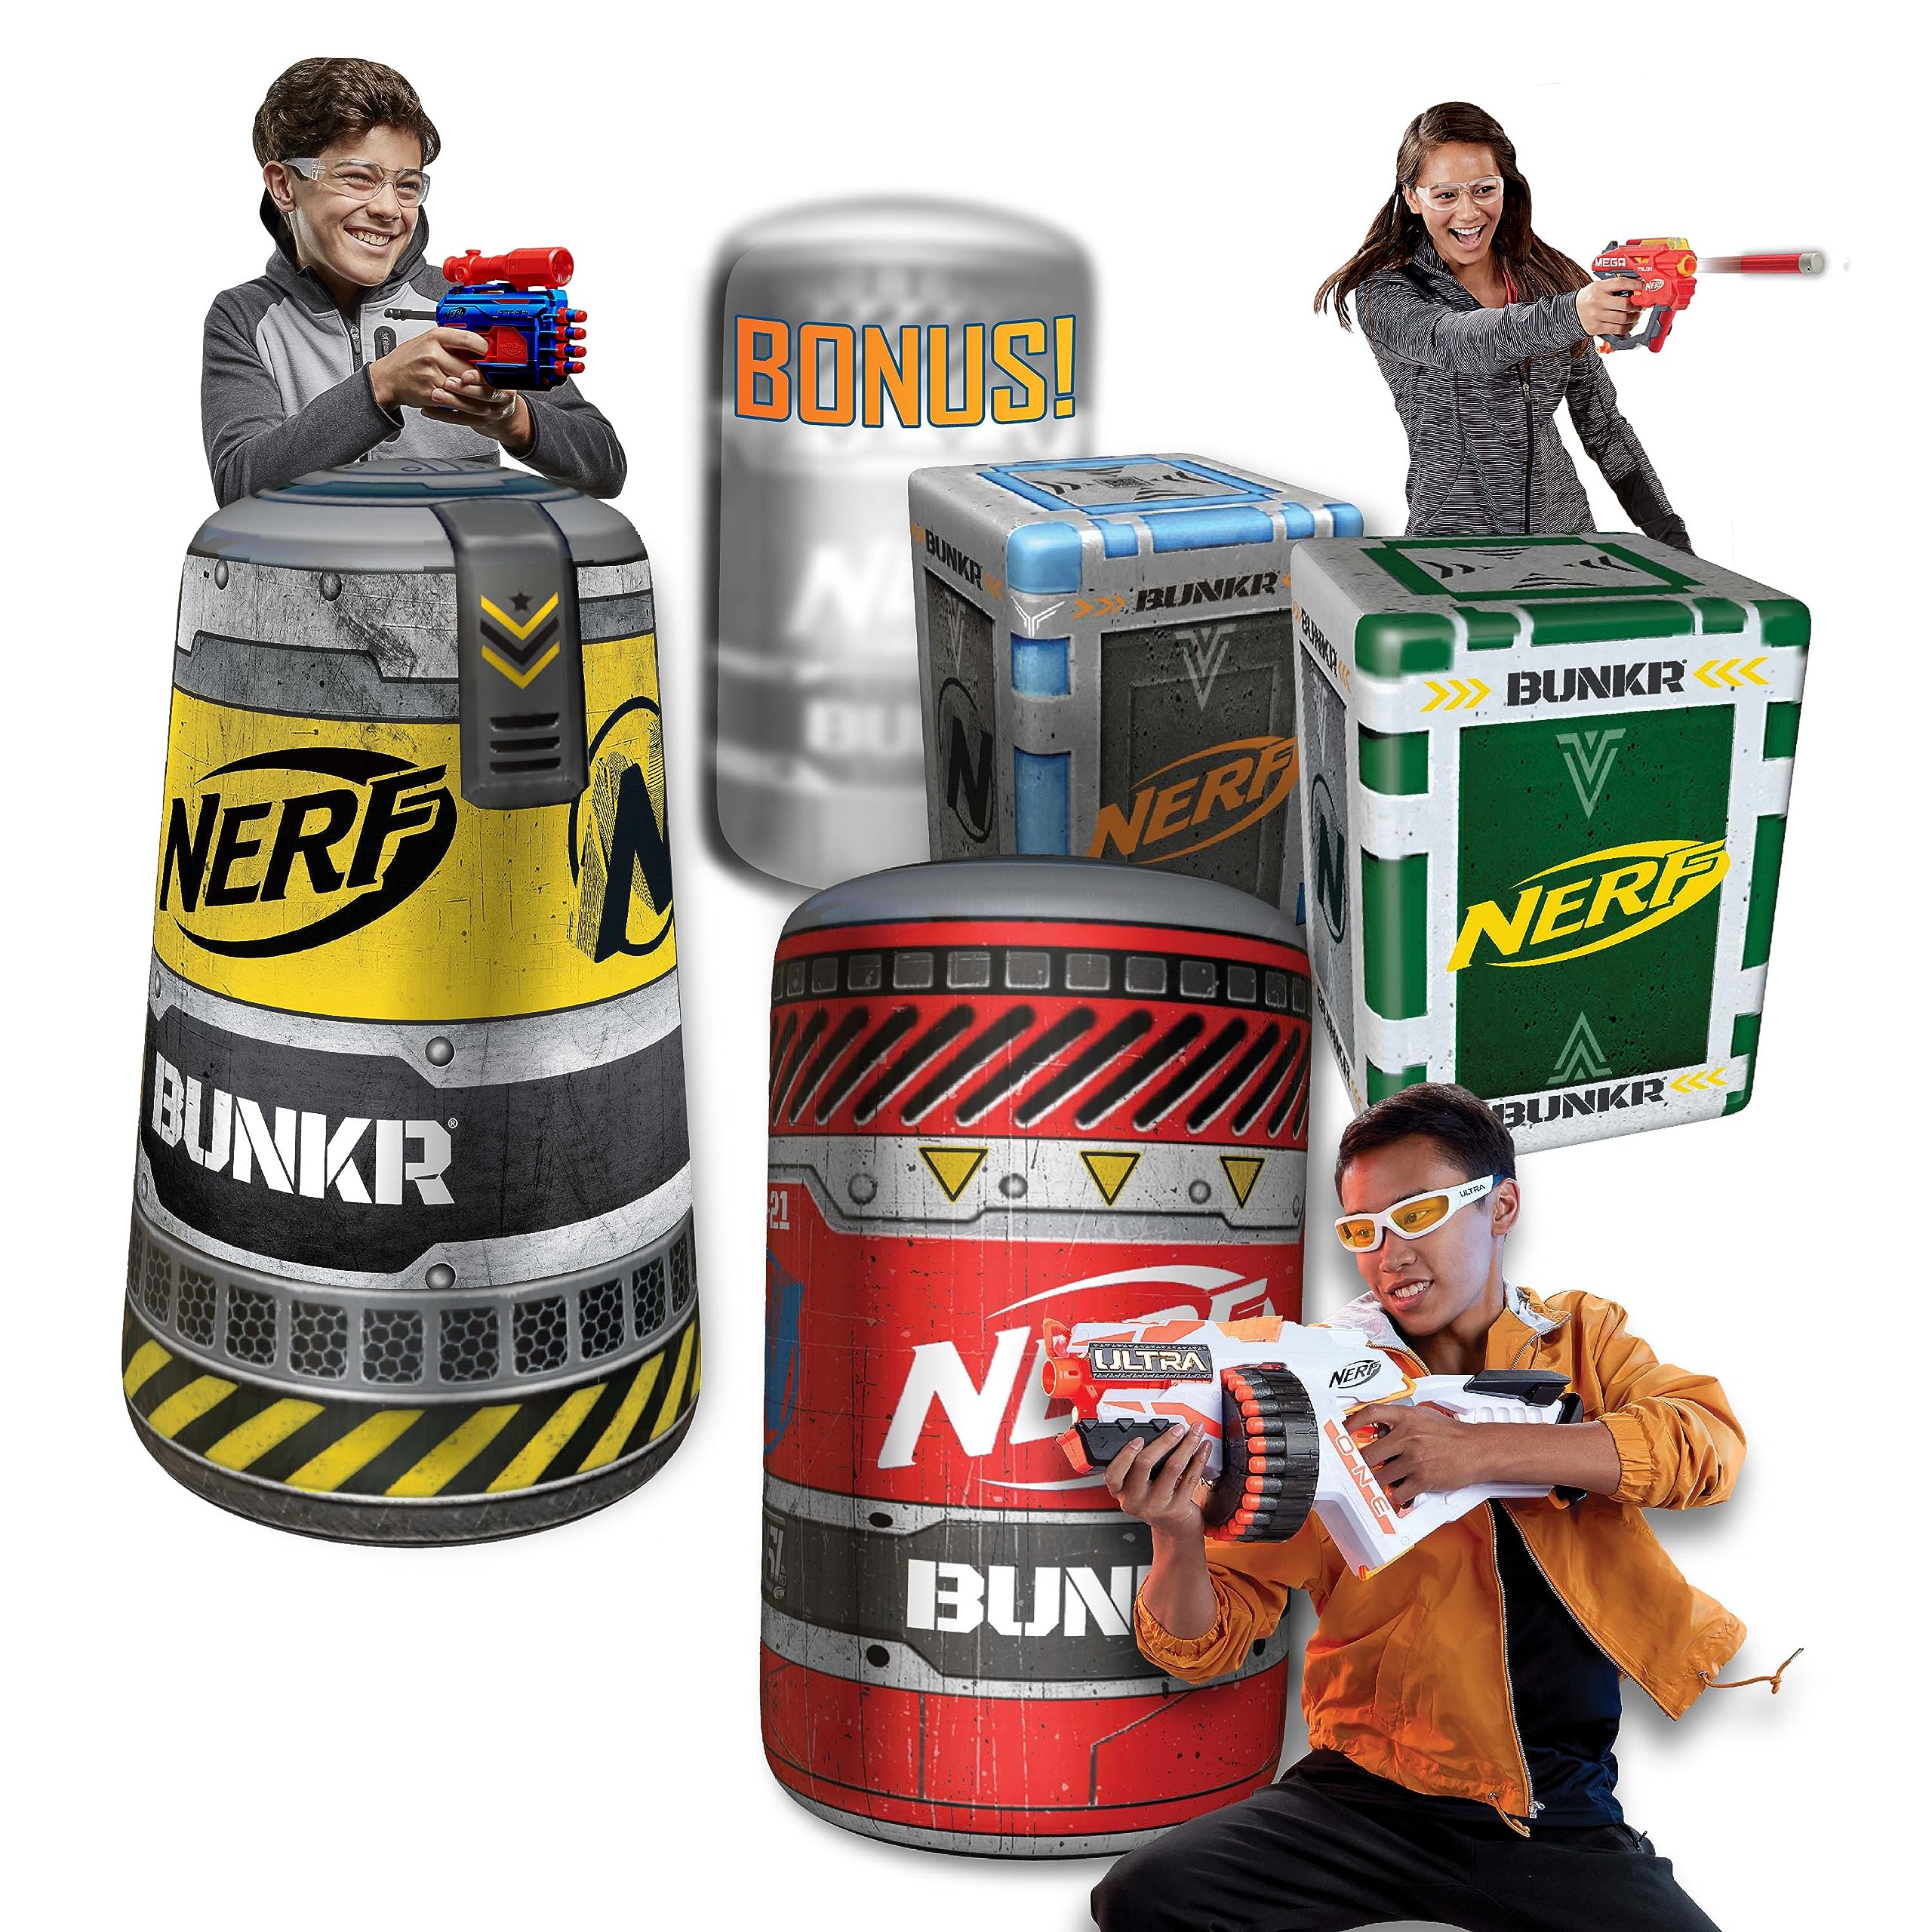 NERF BUNKR Officially Licensed Battle Royale Inflatable Bunker Battlezone - 5 Piece Barricade Set Crates Barrels - Perfect for NERF Party - NERF War Multicolor